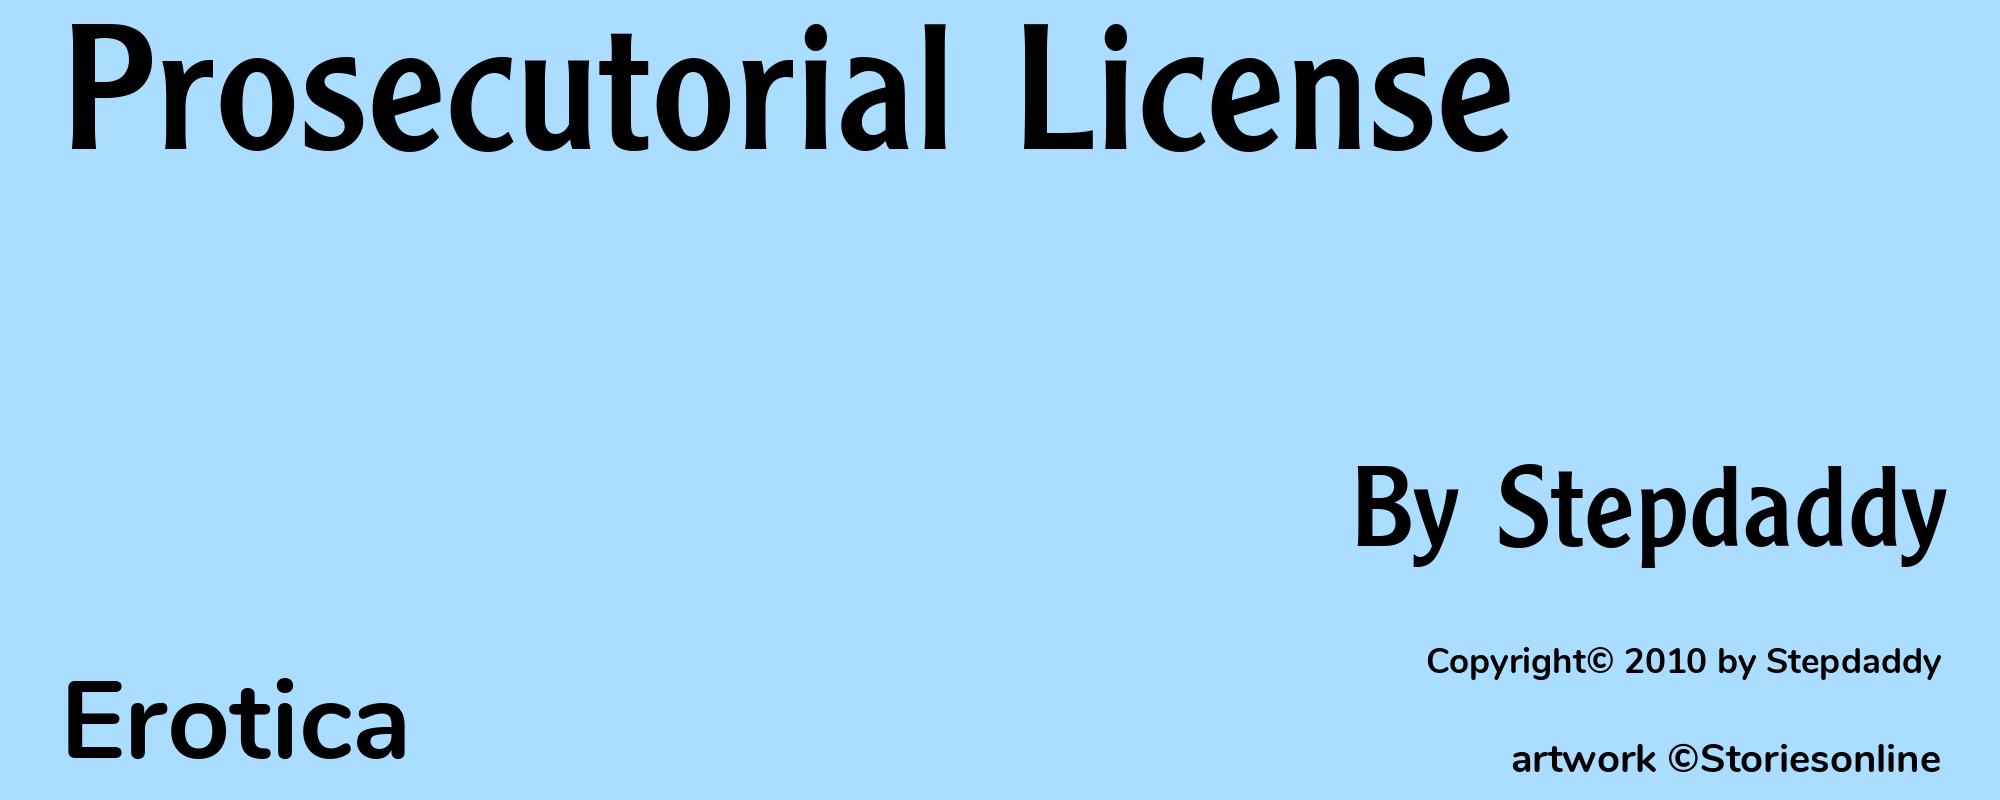 Prosecutorial License - Cover